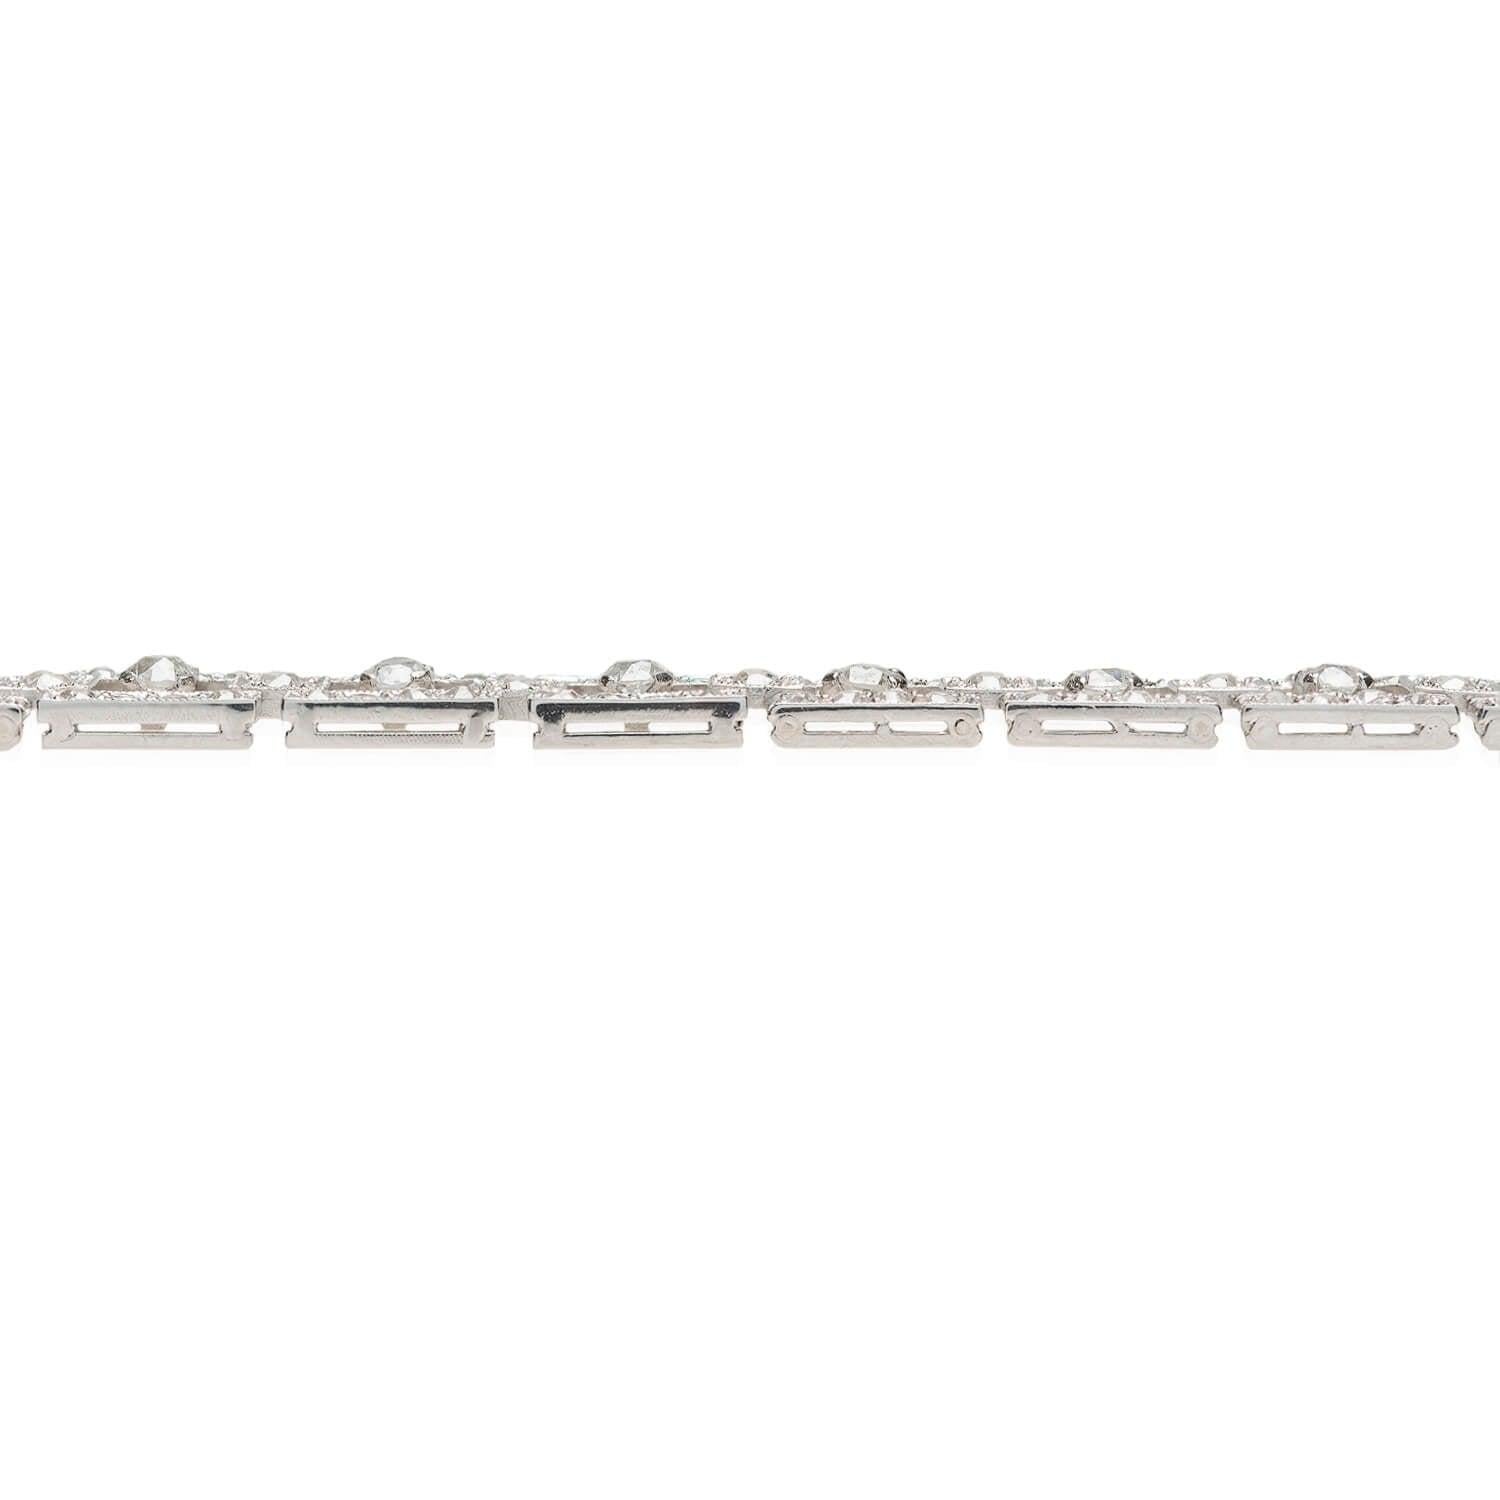 A stunning French diamond link bracelet from the early Art Deco (ca1910s) era! Crafted in platinum, this incredible bracelet glitters with approximately 3ctw of Old Mine Cut diamonds! The diamonds are all of wonderful H/I color and VS-SI clarity,